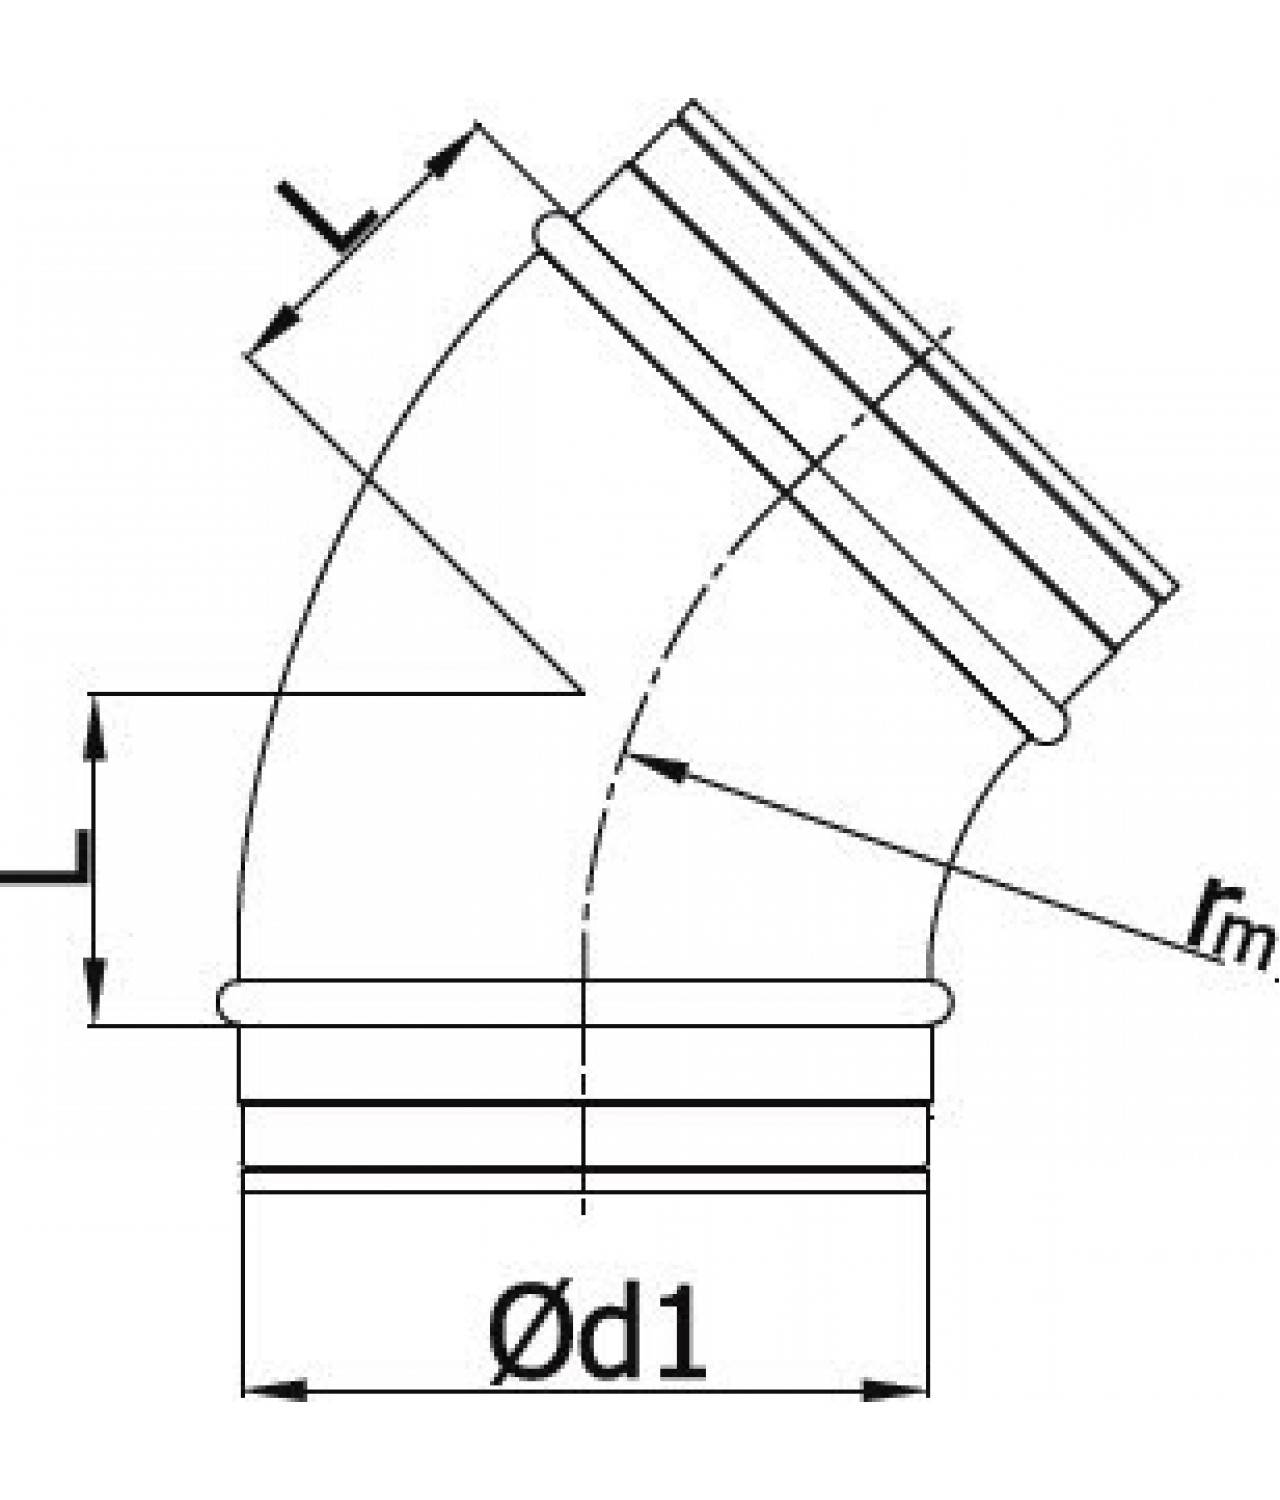 45° duct elbow drawing